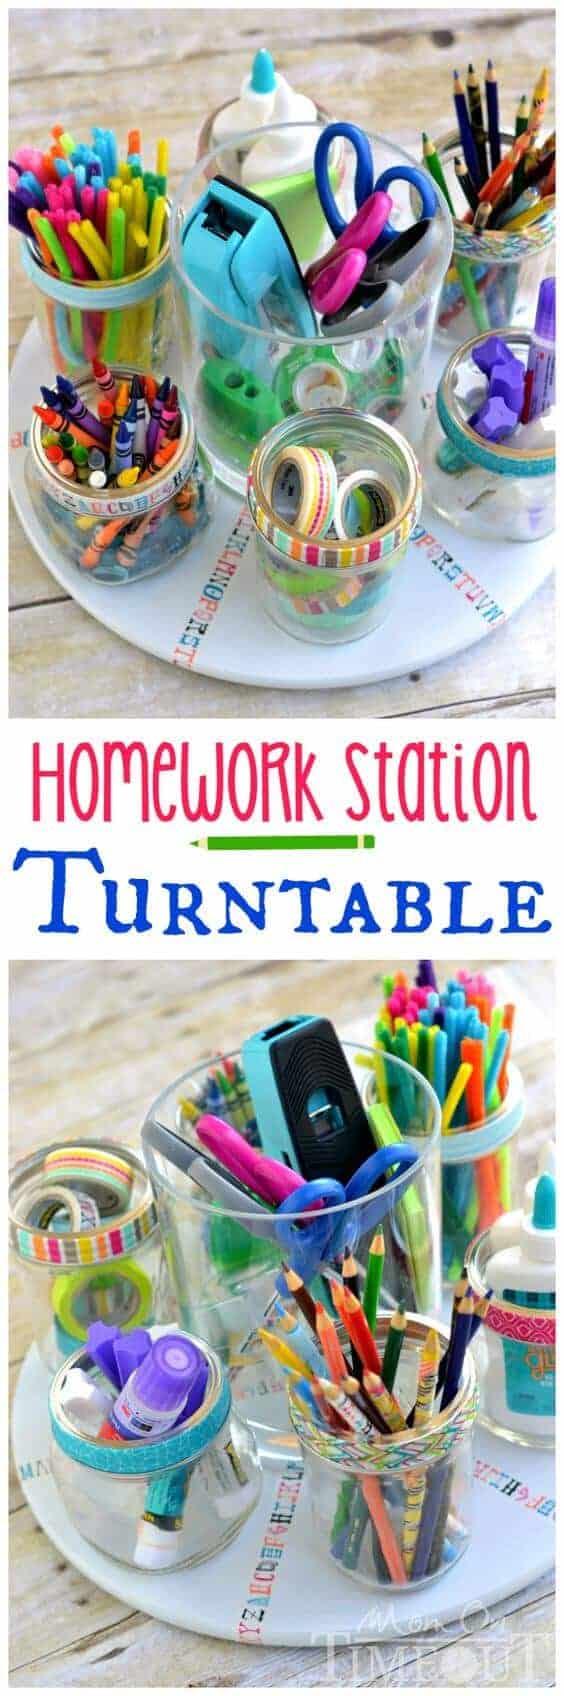 Homework Station Turntable by Mom on Tmeout